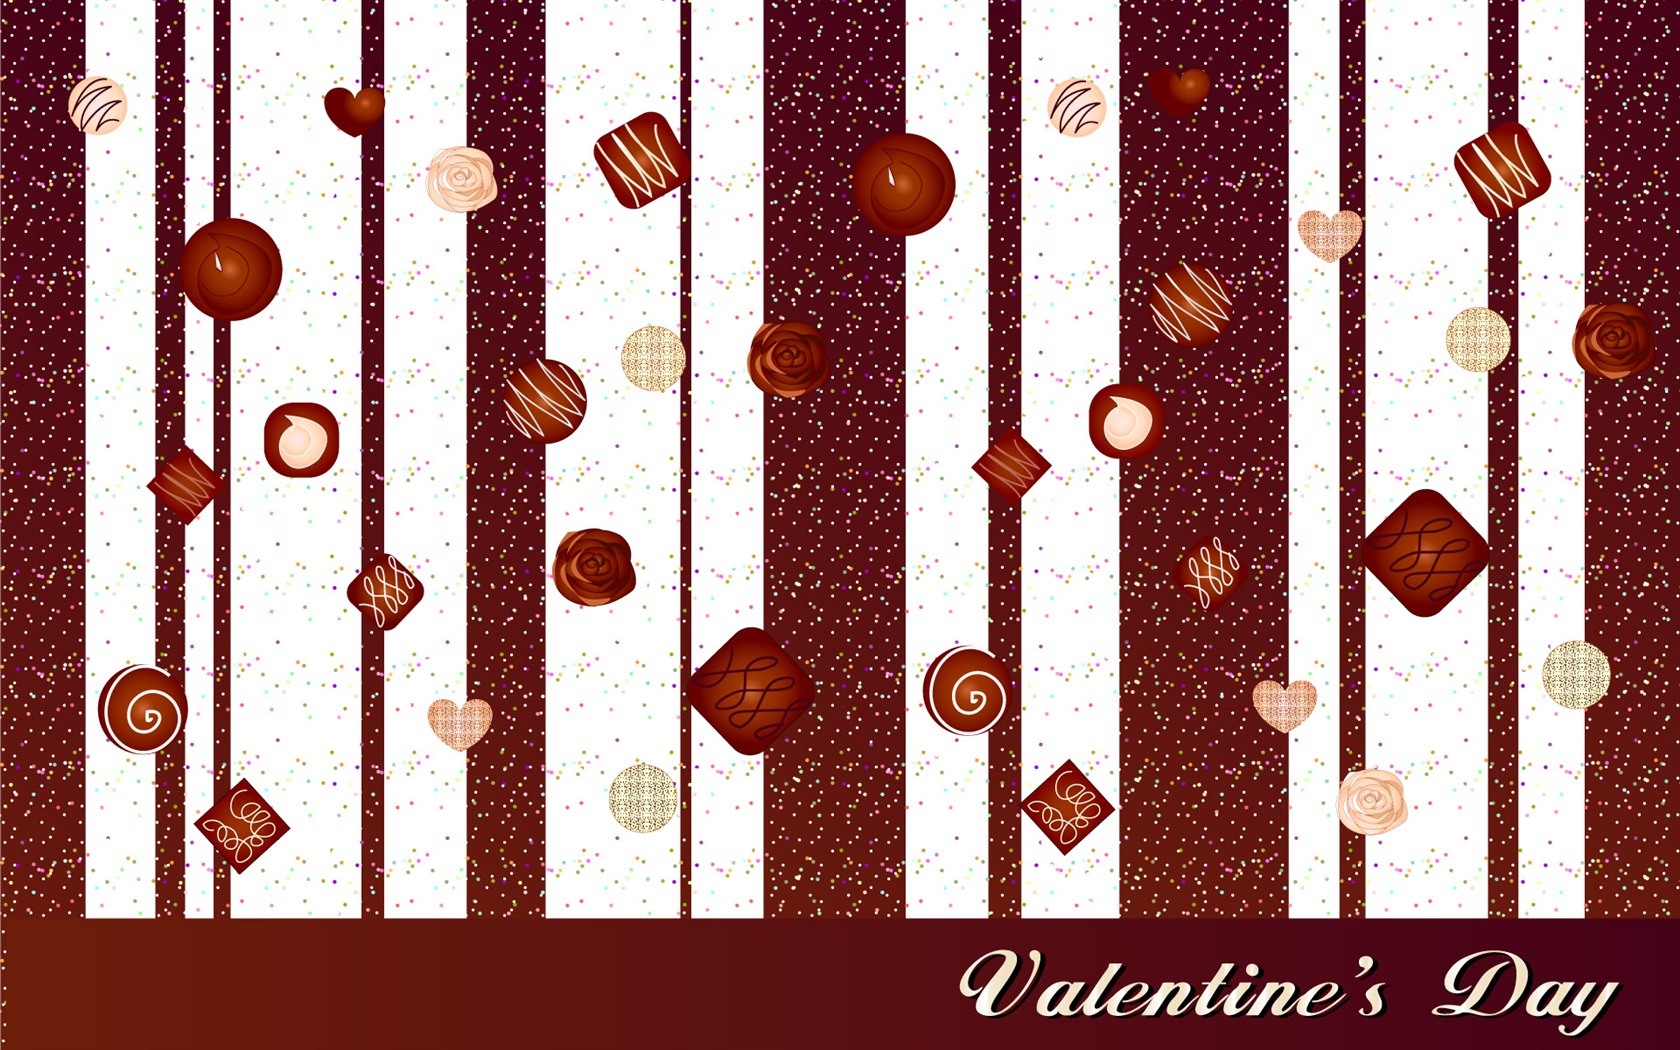 Valentine's Day Theme Wallpapers (1) #18 - 1680x1050